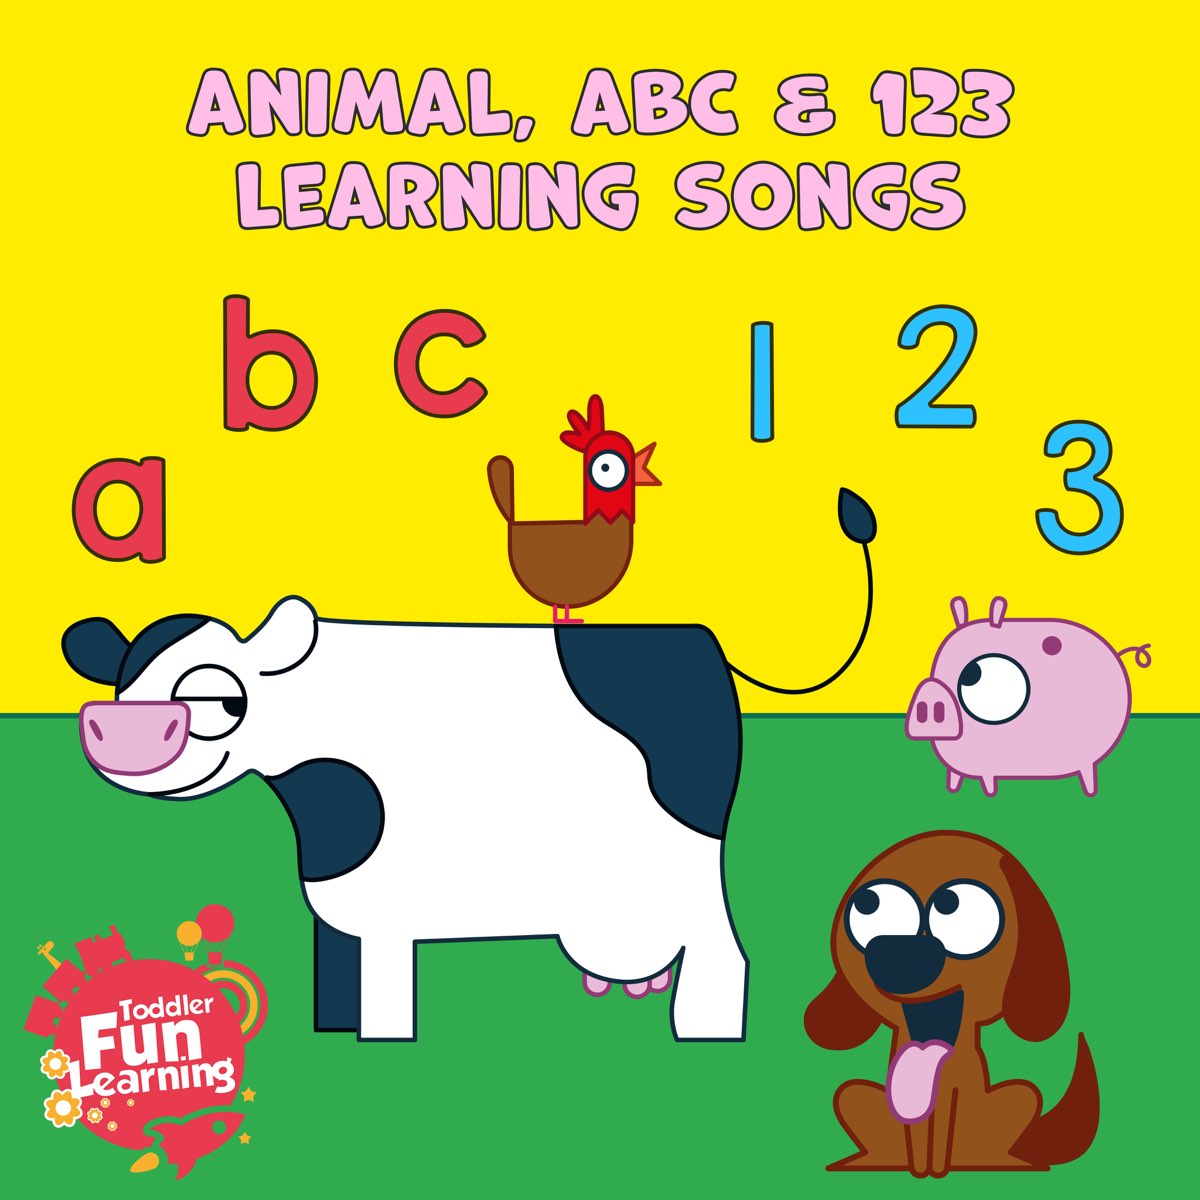 Animal, ABC & 123 Learning Songs by Toddler Fun Learning on Apple Music